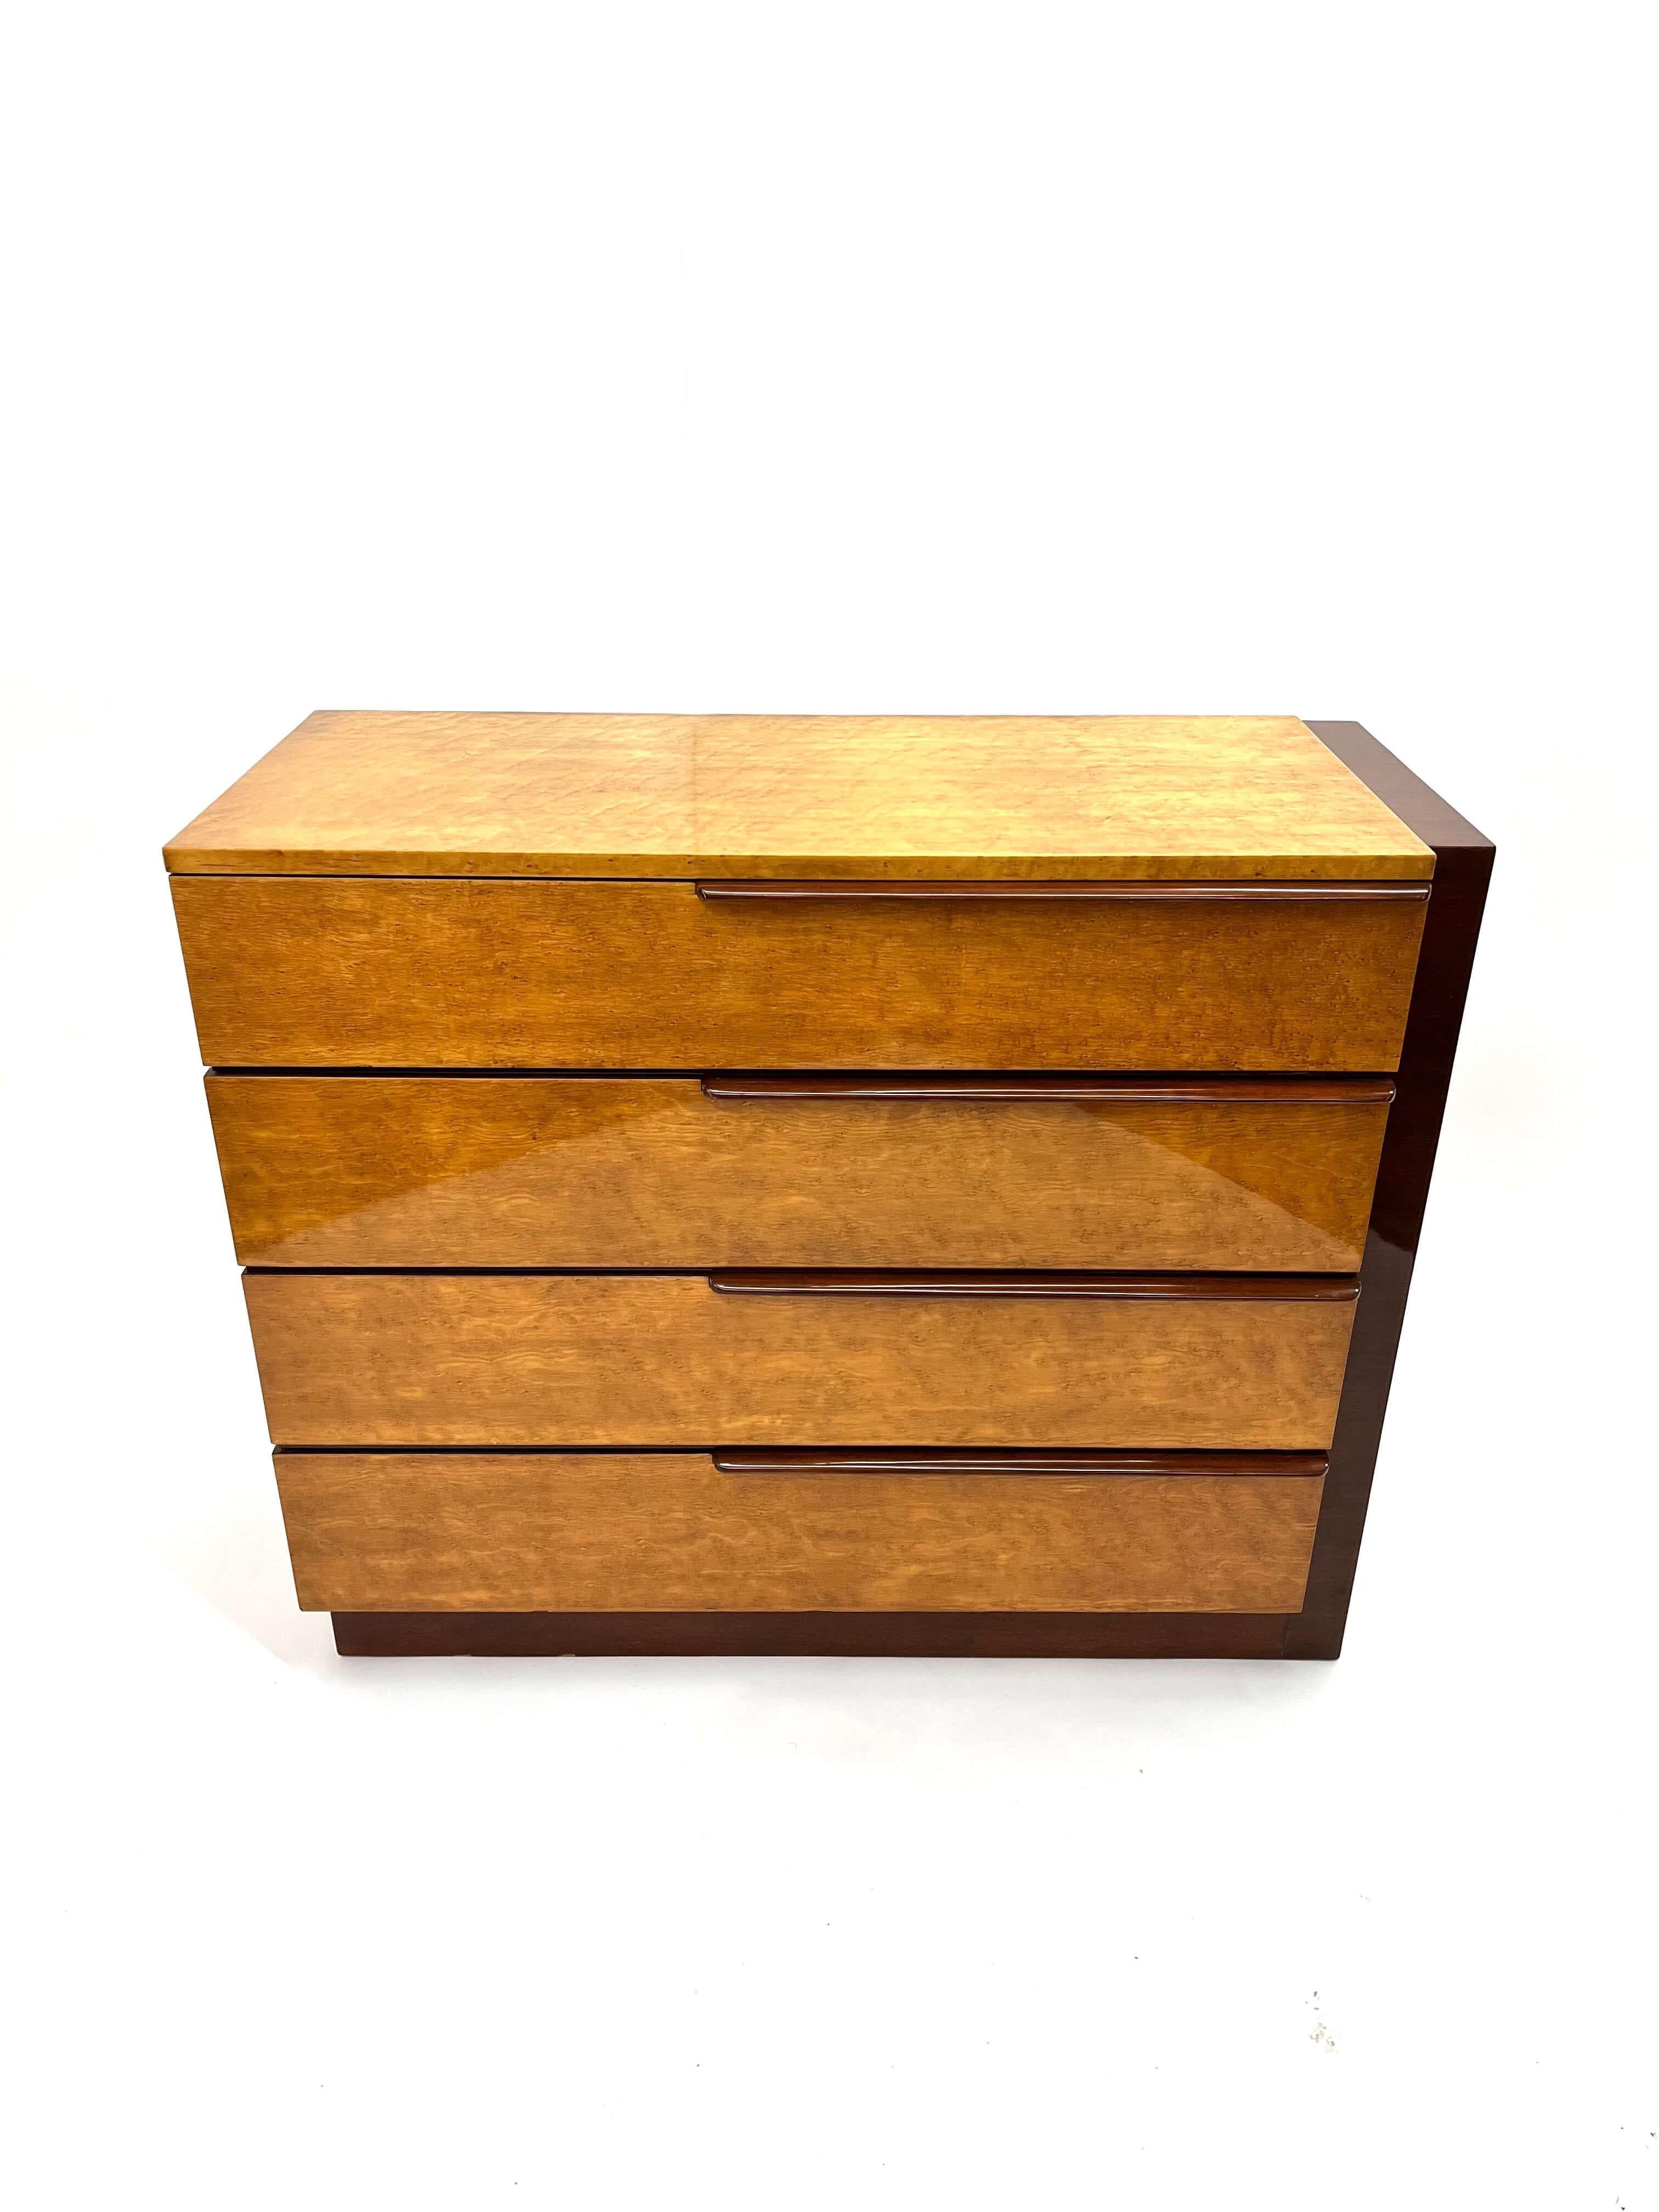 Gilbert Rhode designed this gorgeous dresser  in birdseye maple and mahogany. It has the perfect balance of the fine craftsmanship and rich materials characteristic of the Art Deco era.  Lacquered birds eye maple represents luxury, glamour, and